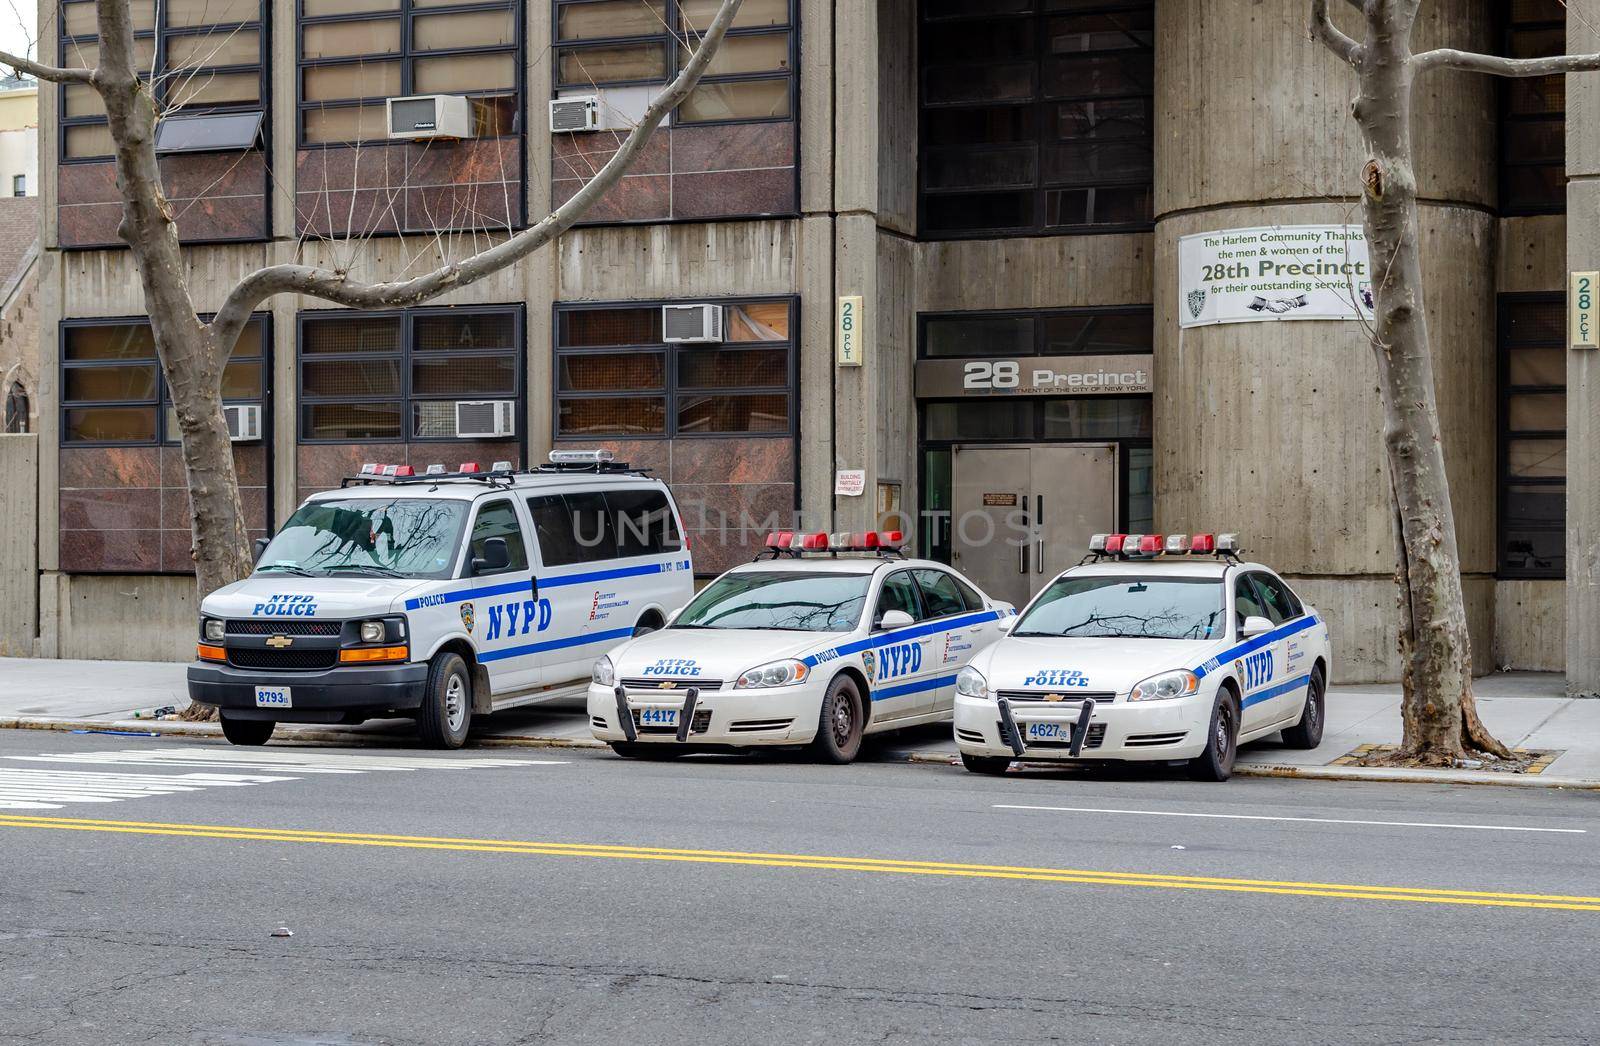 NYPD Different New York Police Department cars parked next to each other at a police station, Harlem, New York City by bildgigant